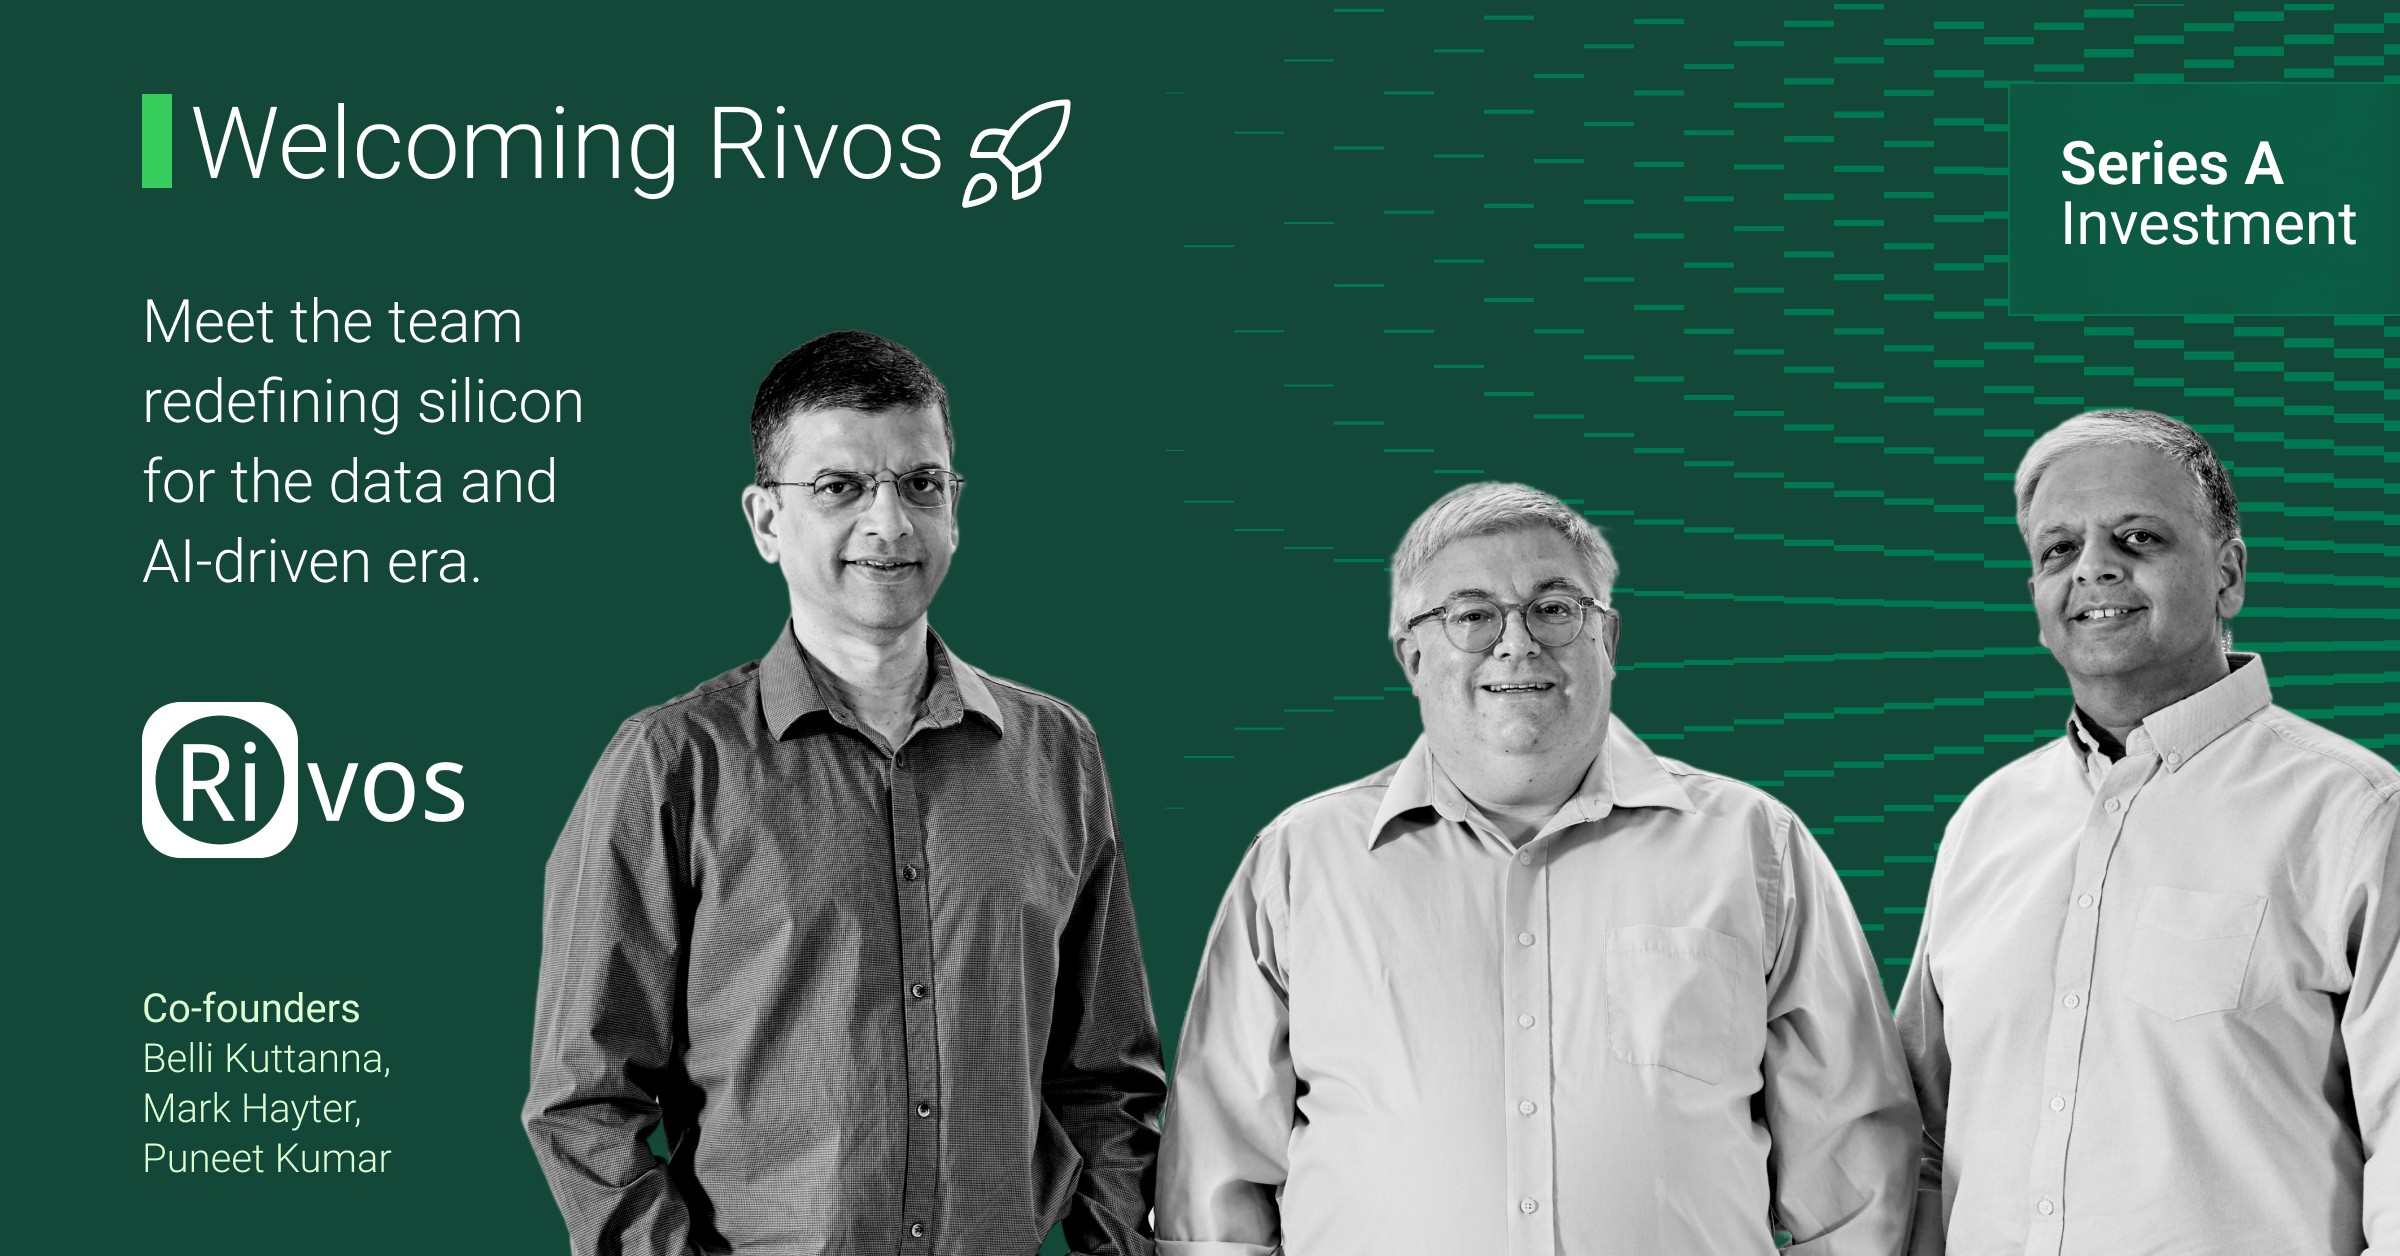 DTC welcomes Rivos to the portfolio. The three cofounders stand side by side.